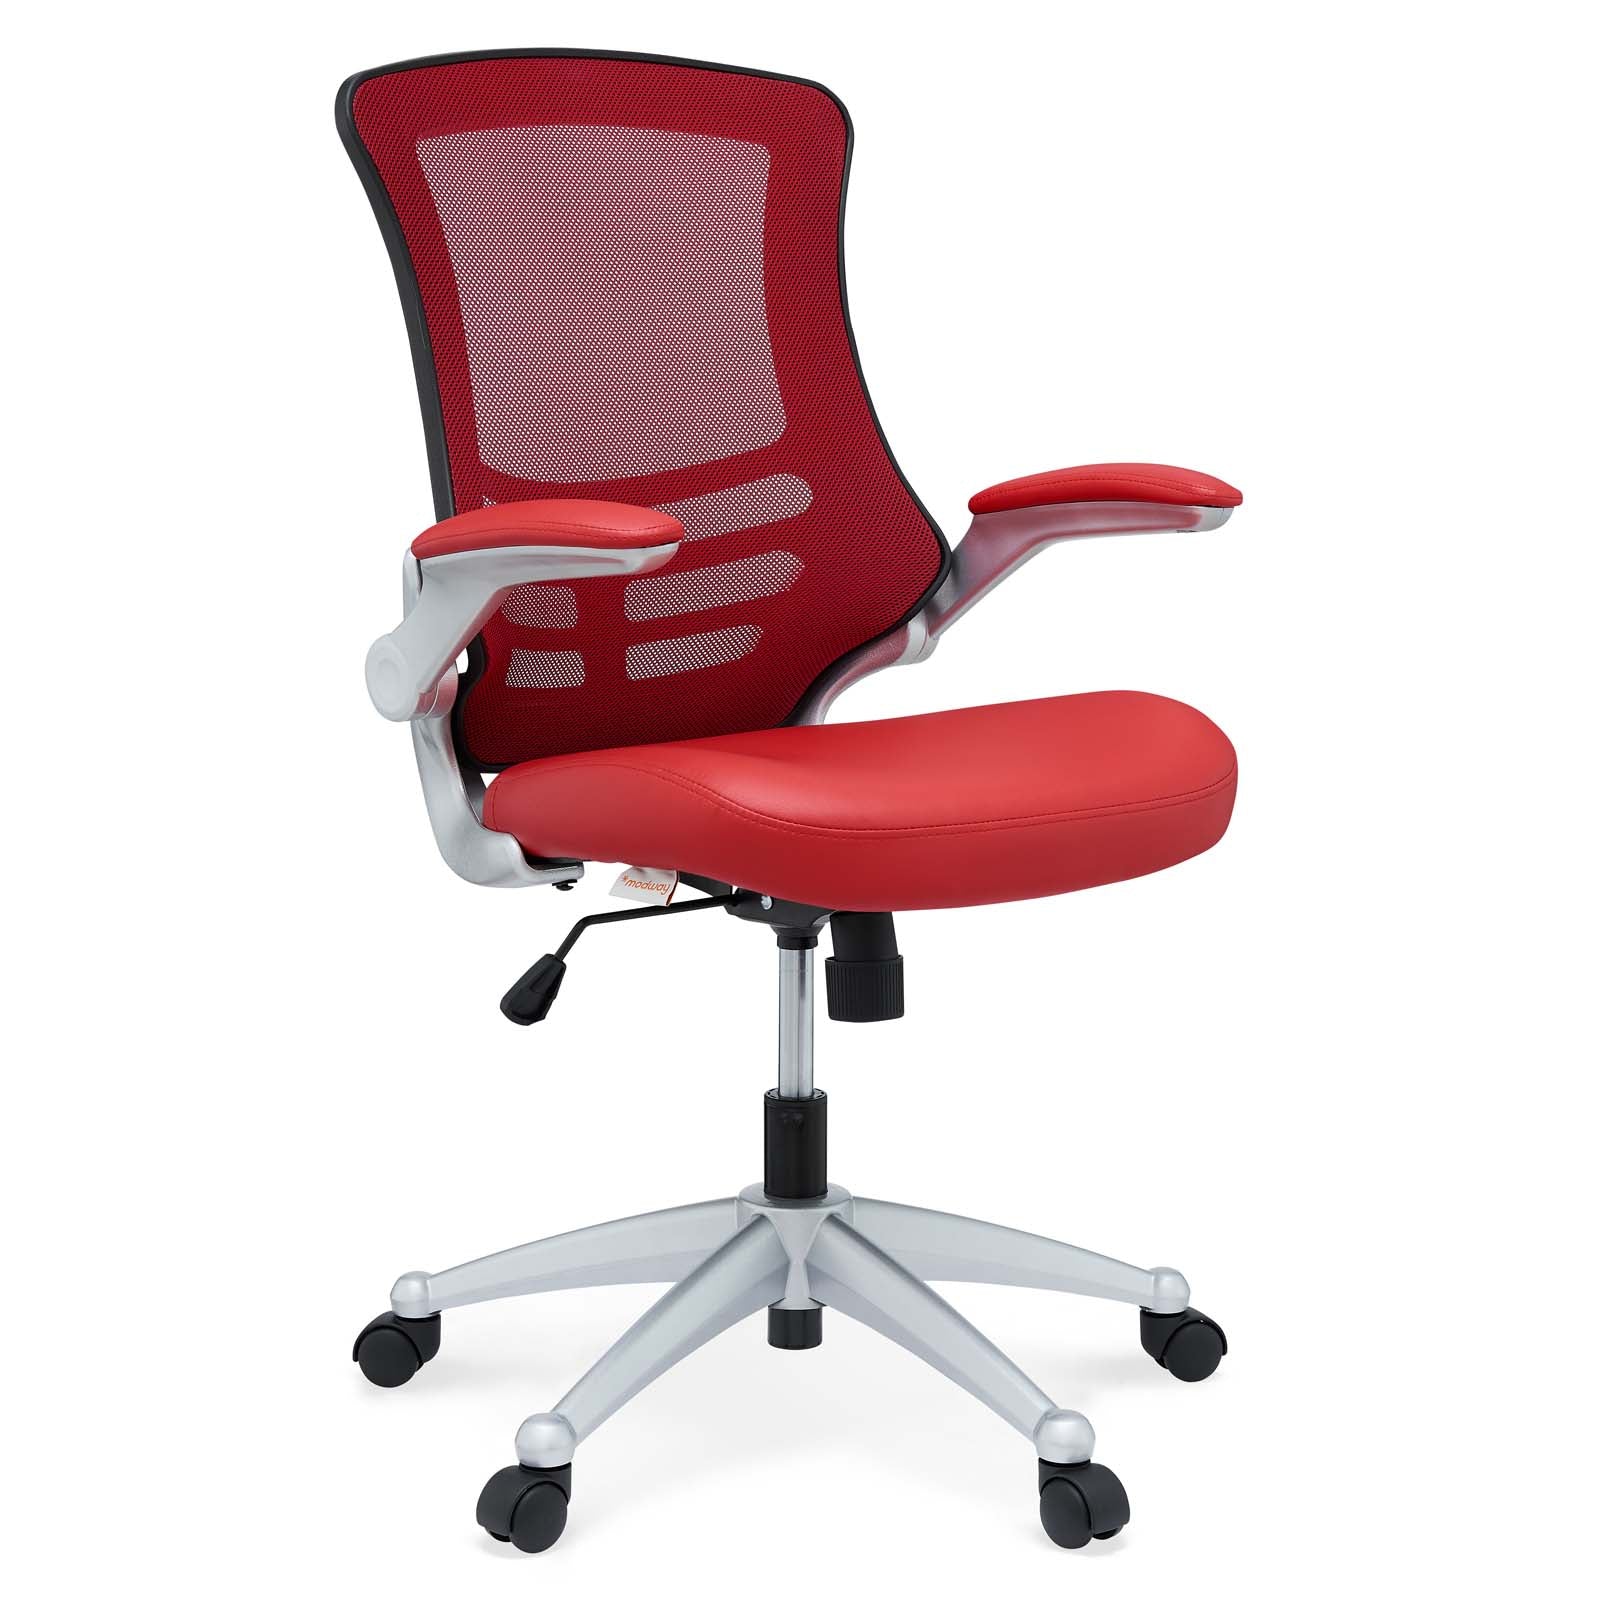 Orange Attainment Office Chair with Backmesh at BUILDMyplace